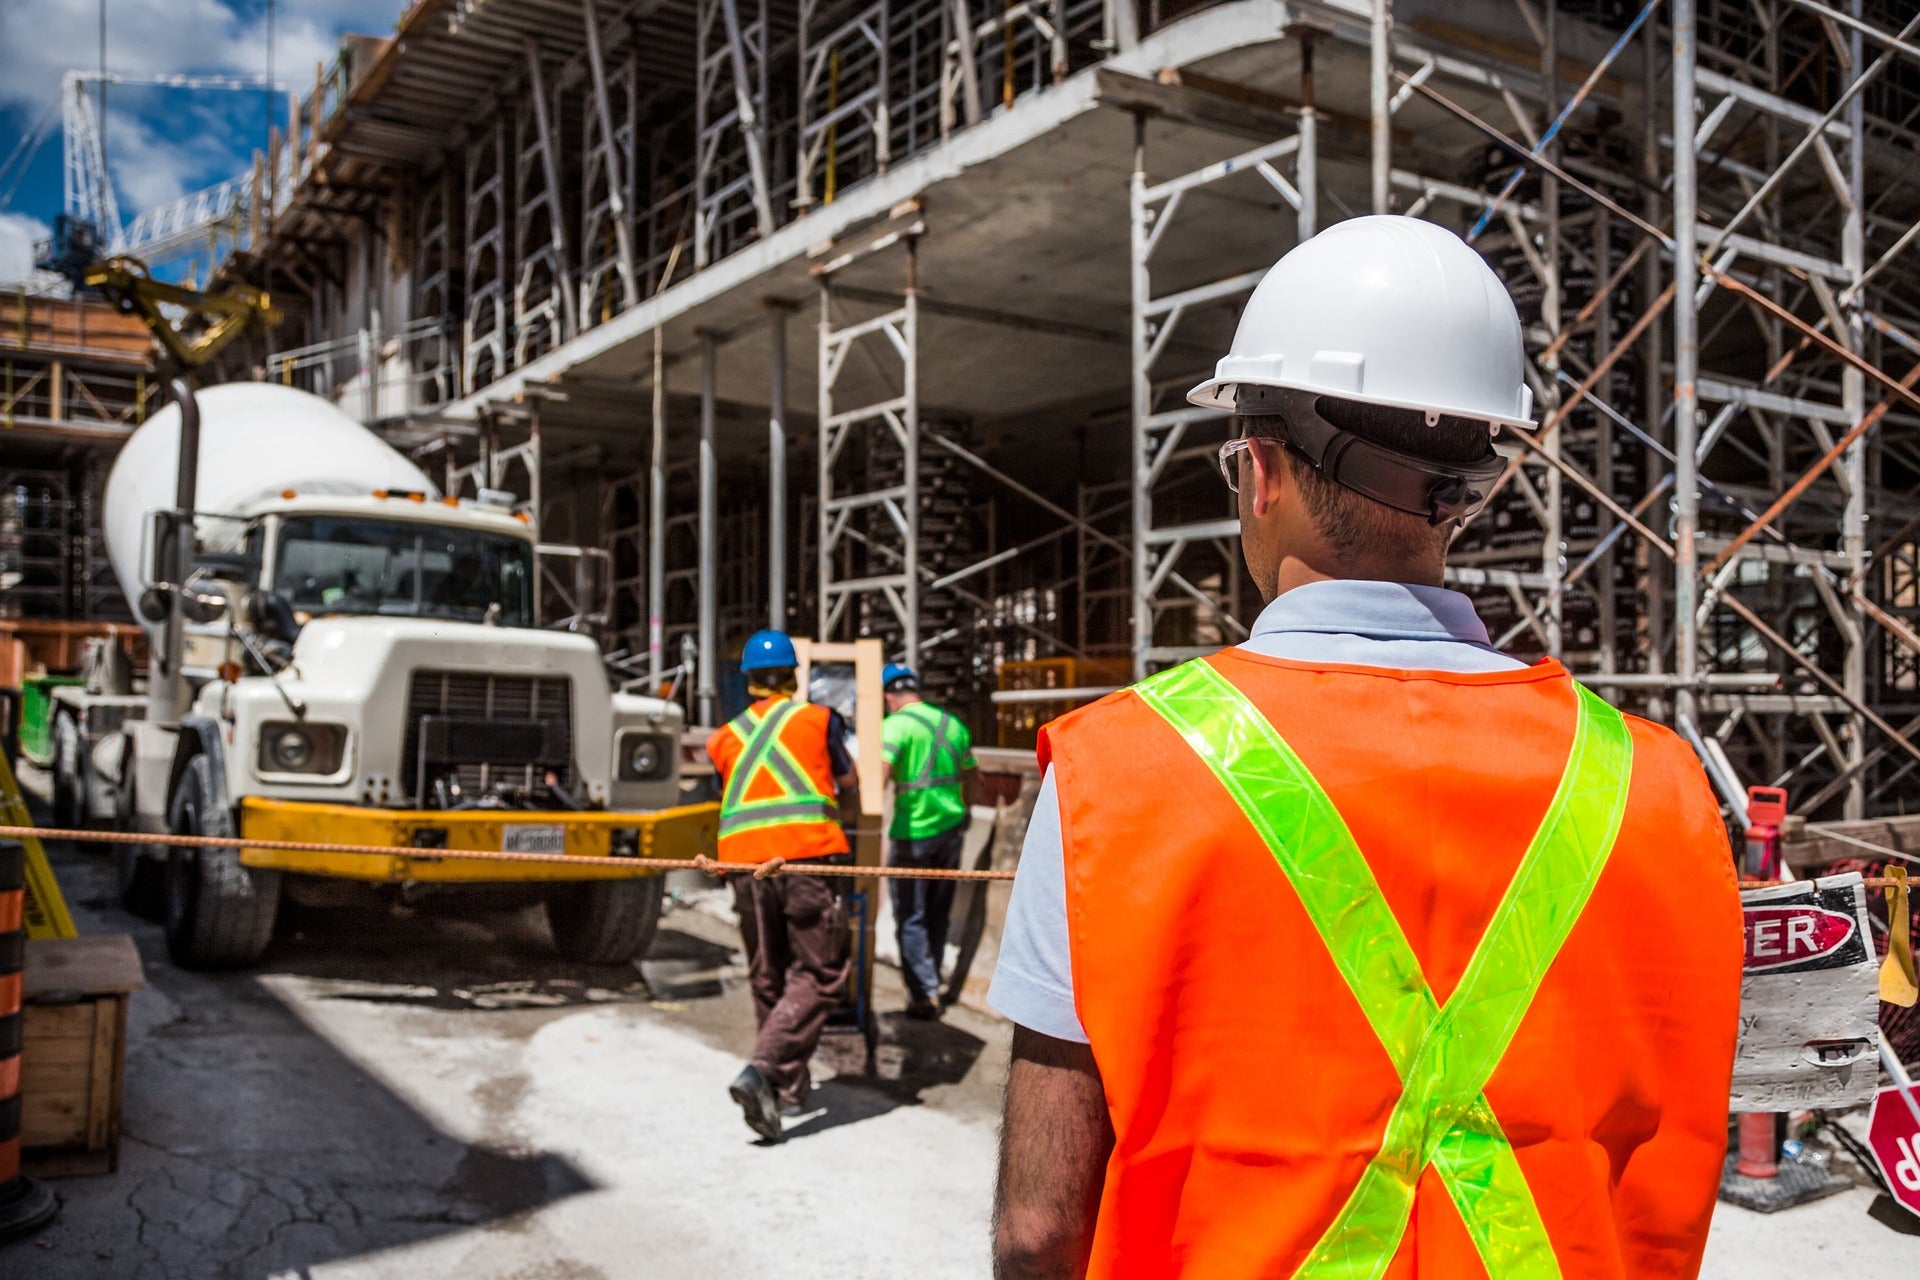 5 Reasons to Include Recovery Equipment in Construction Safety Gear